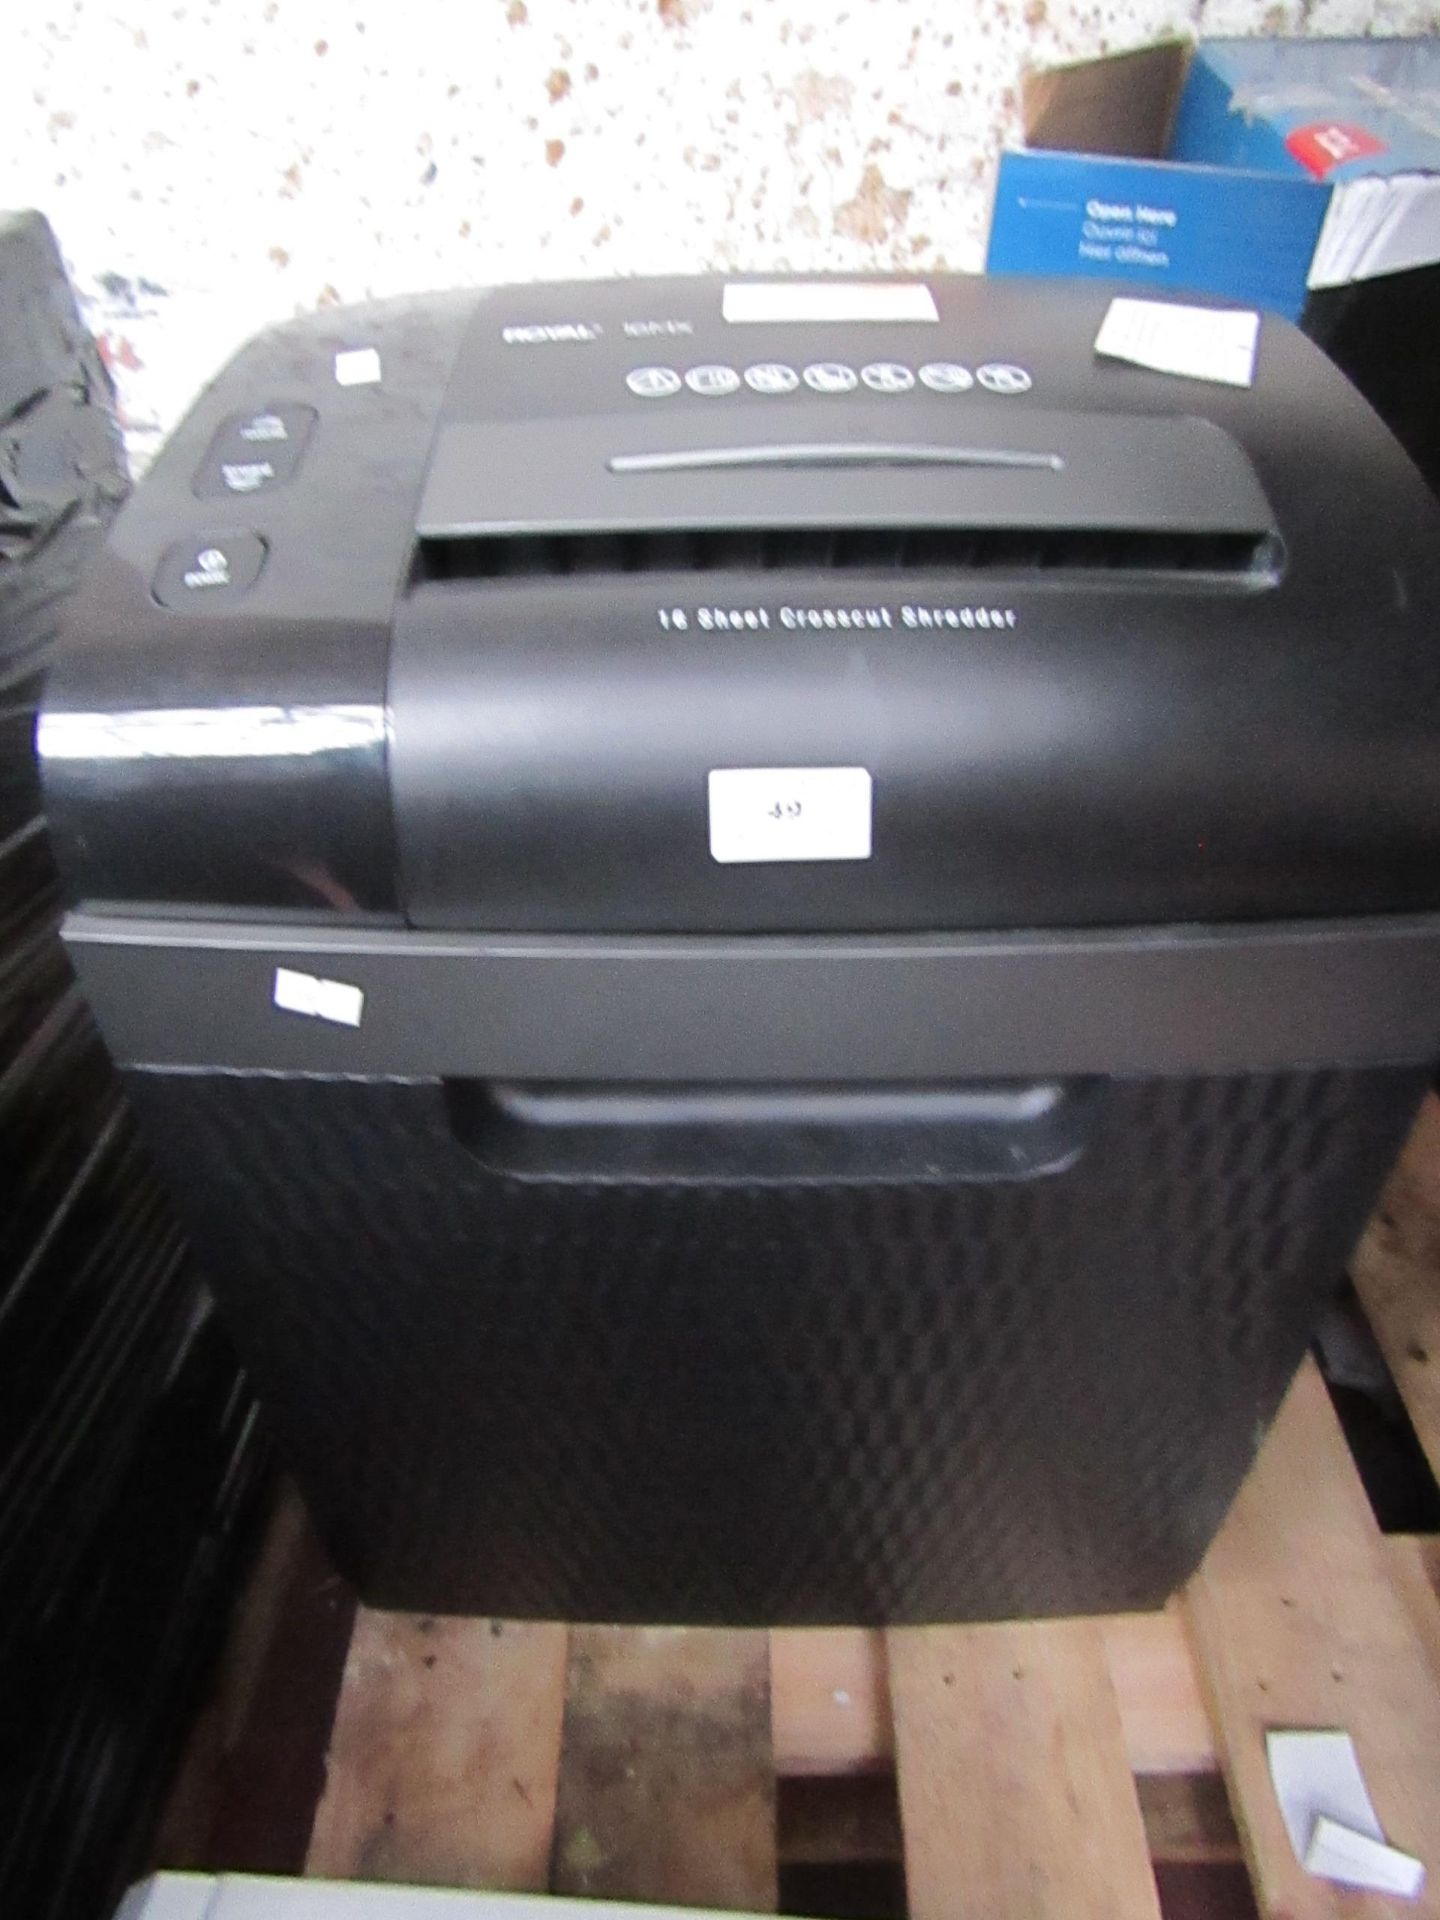 Royal 16MX 16 sheet cross cut shredder, powers on but not tested all functions.